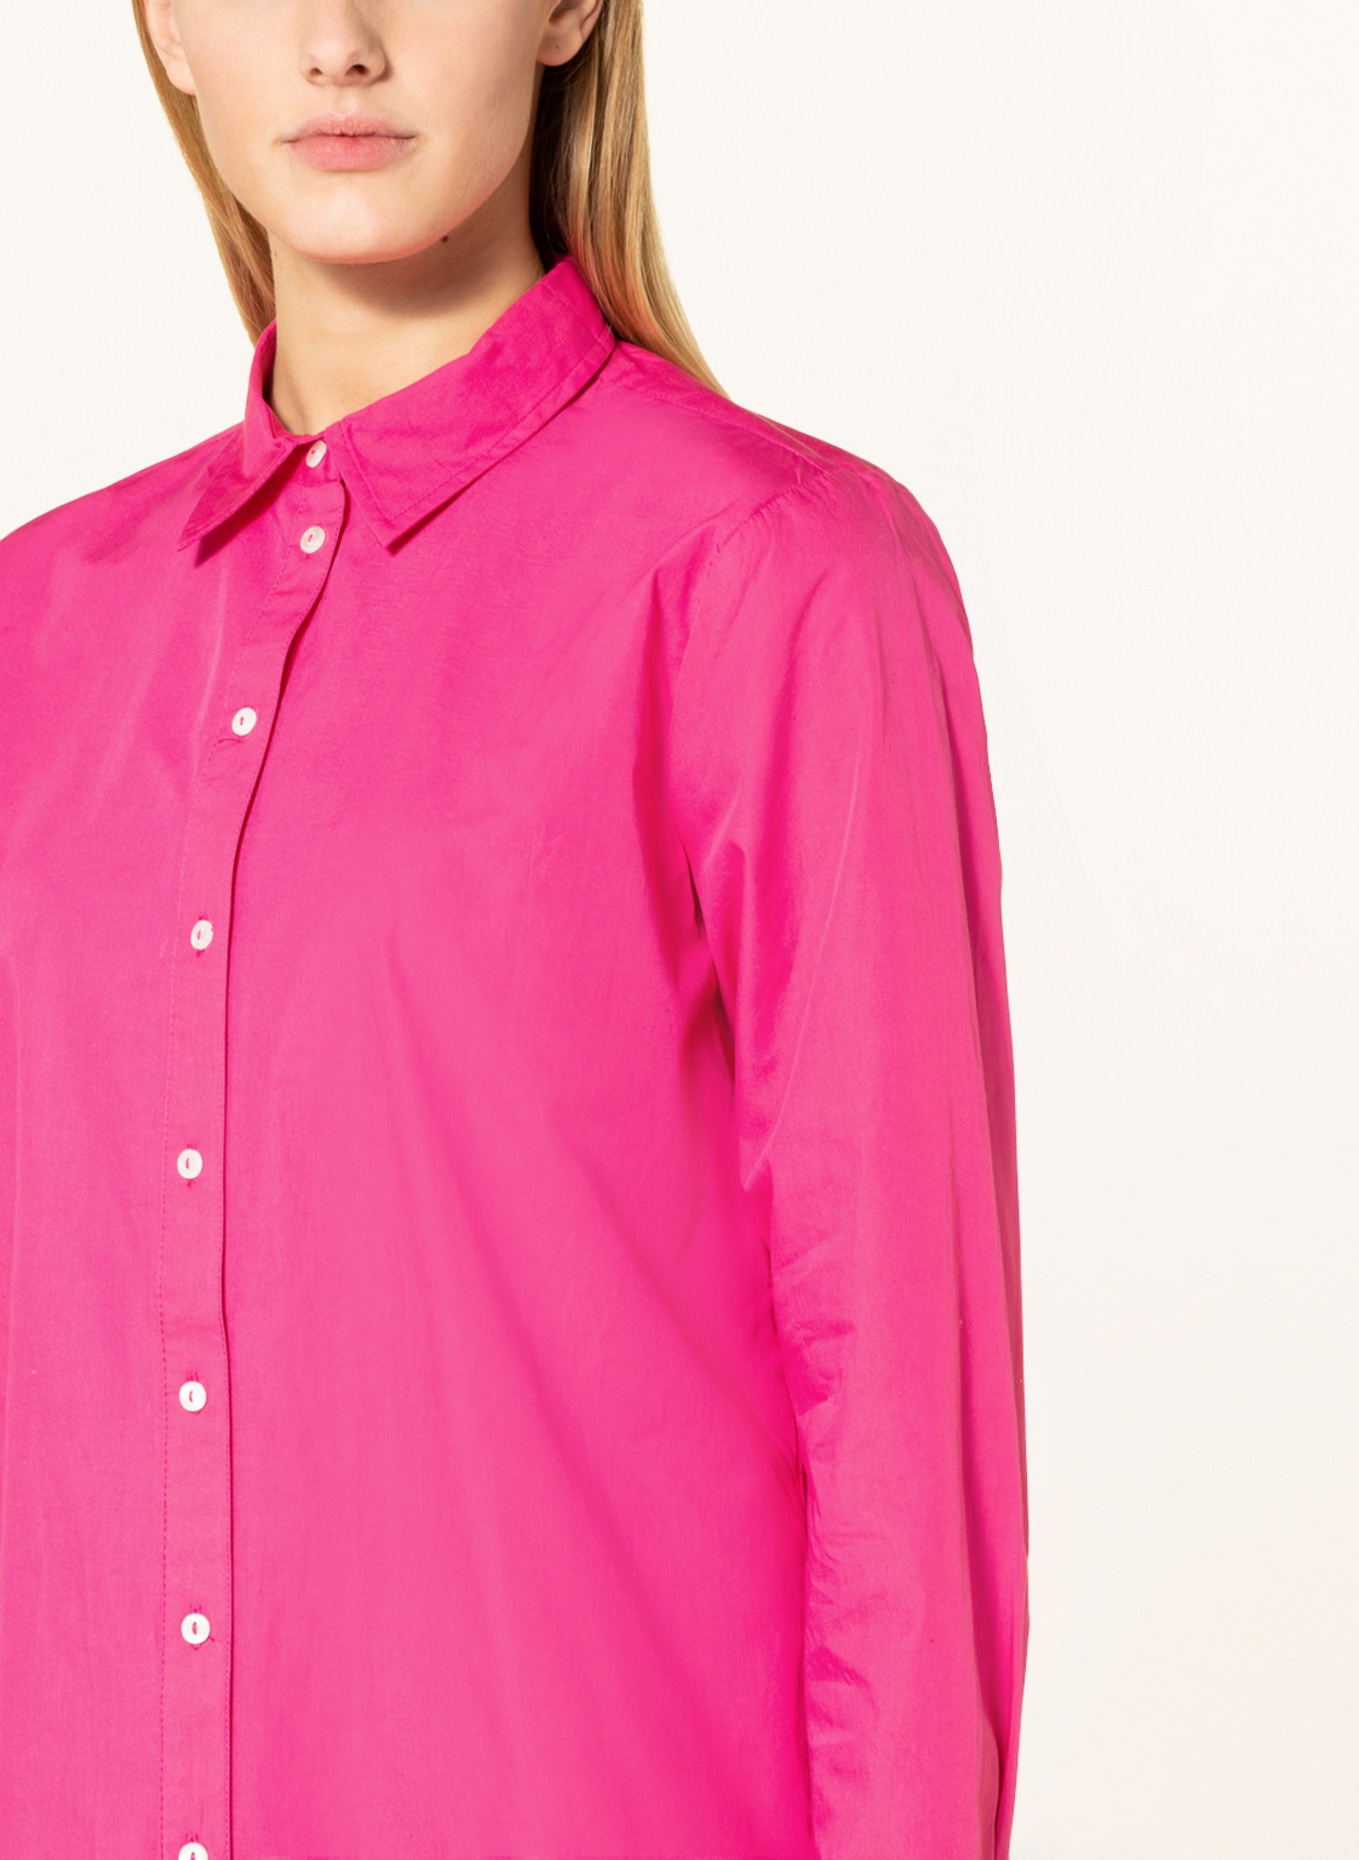 ONLY Shirt blouse, Color: PINK (Image 4)